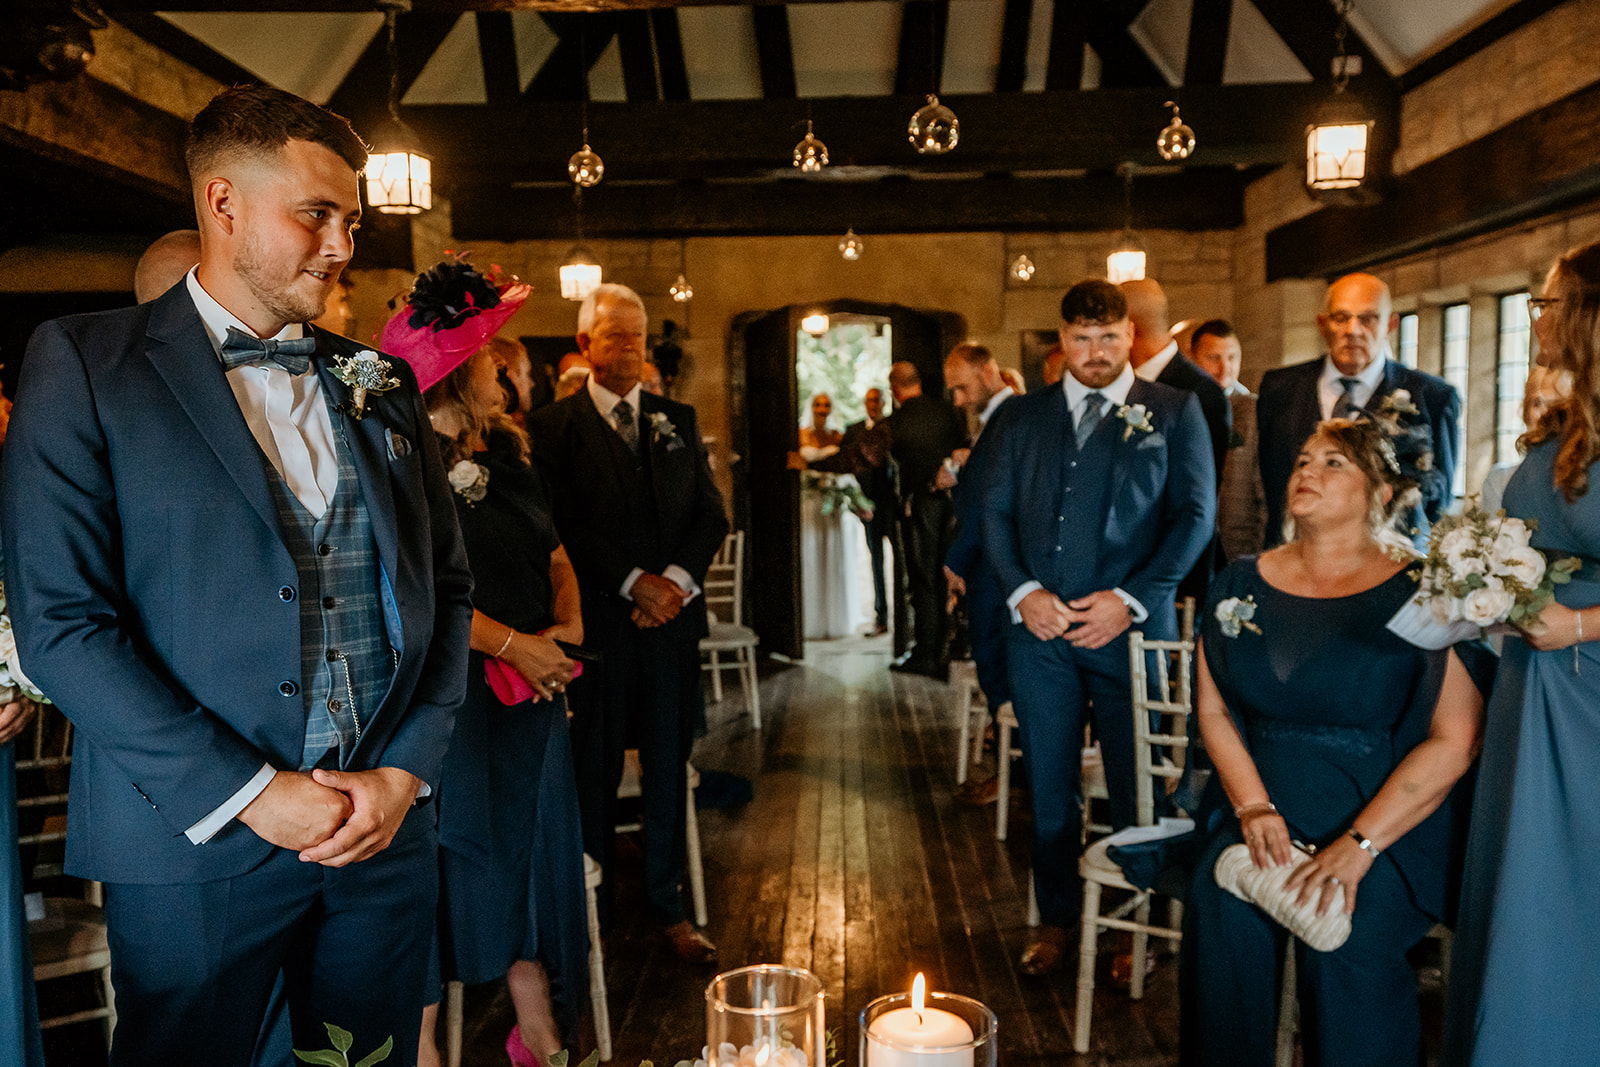 The summer house wedding at Hooton Pagnell Hall